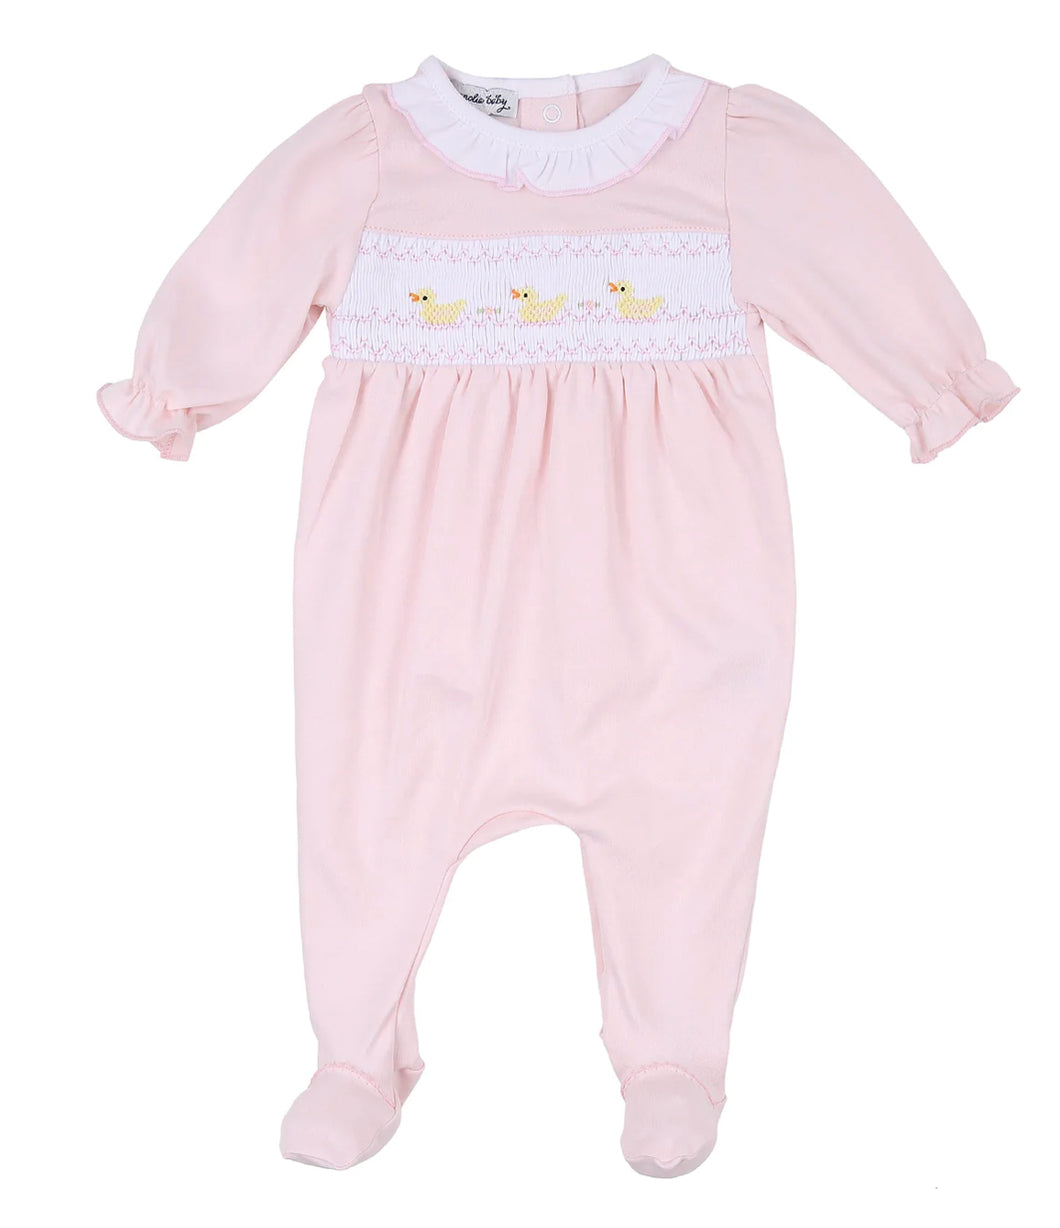 JUST DUCKY CLASSICS SMOCKED
GIRL FOOTIE - PINK